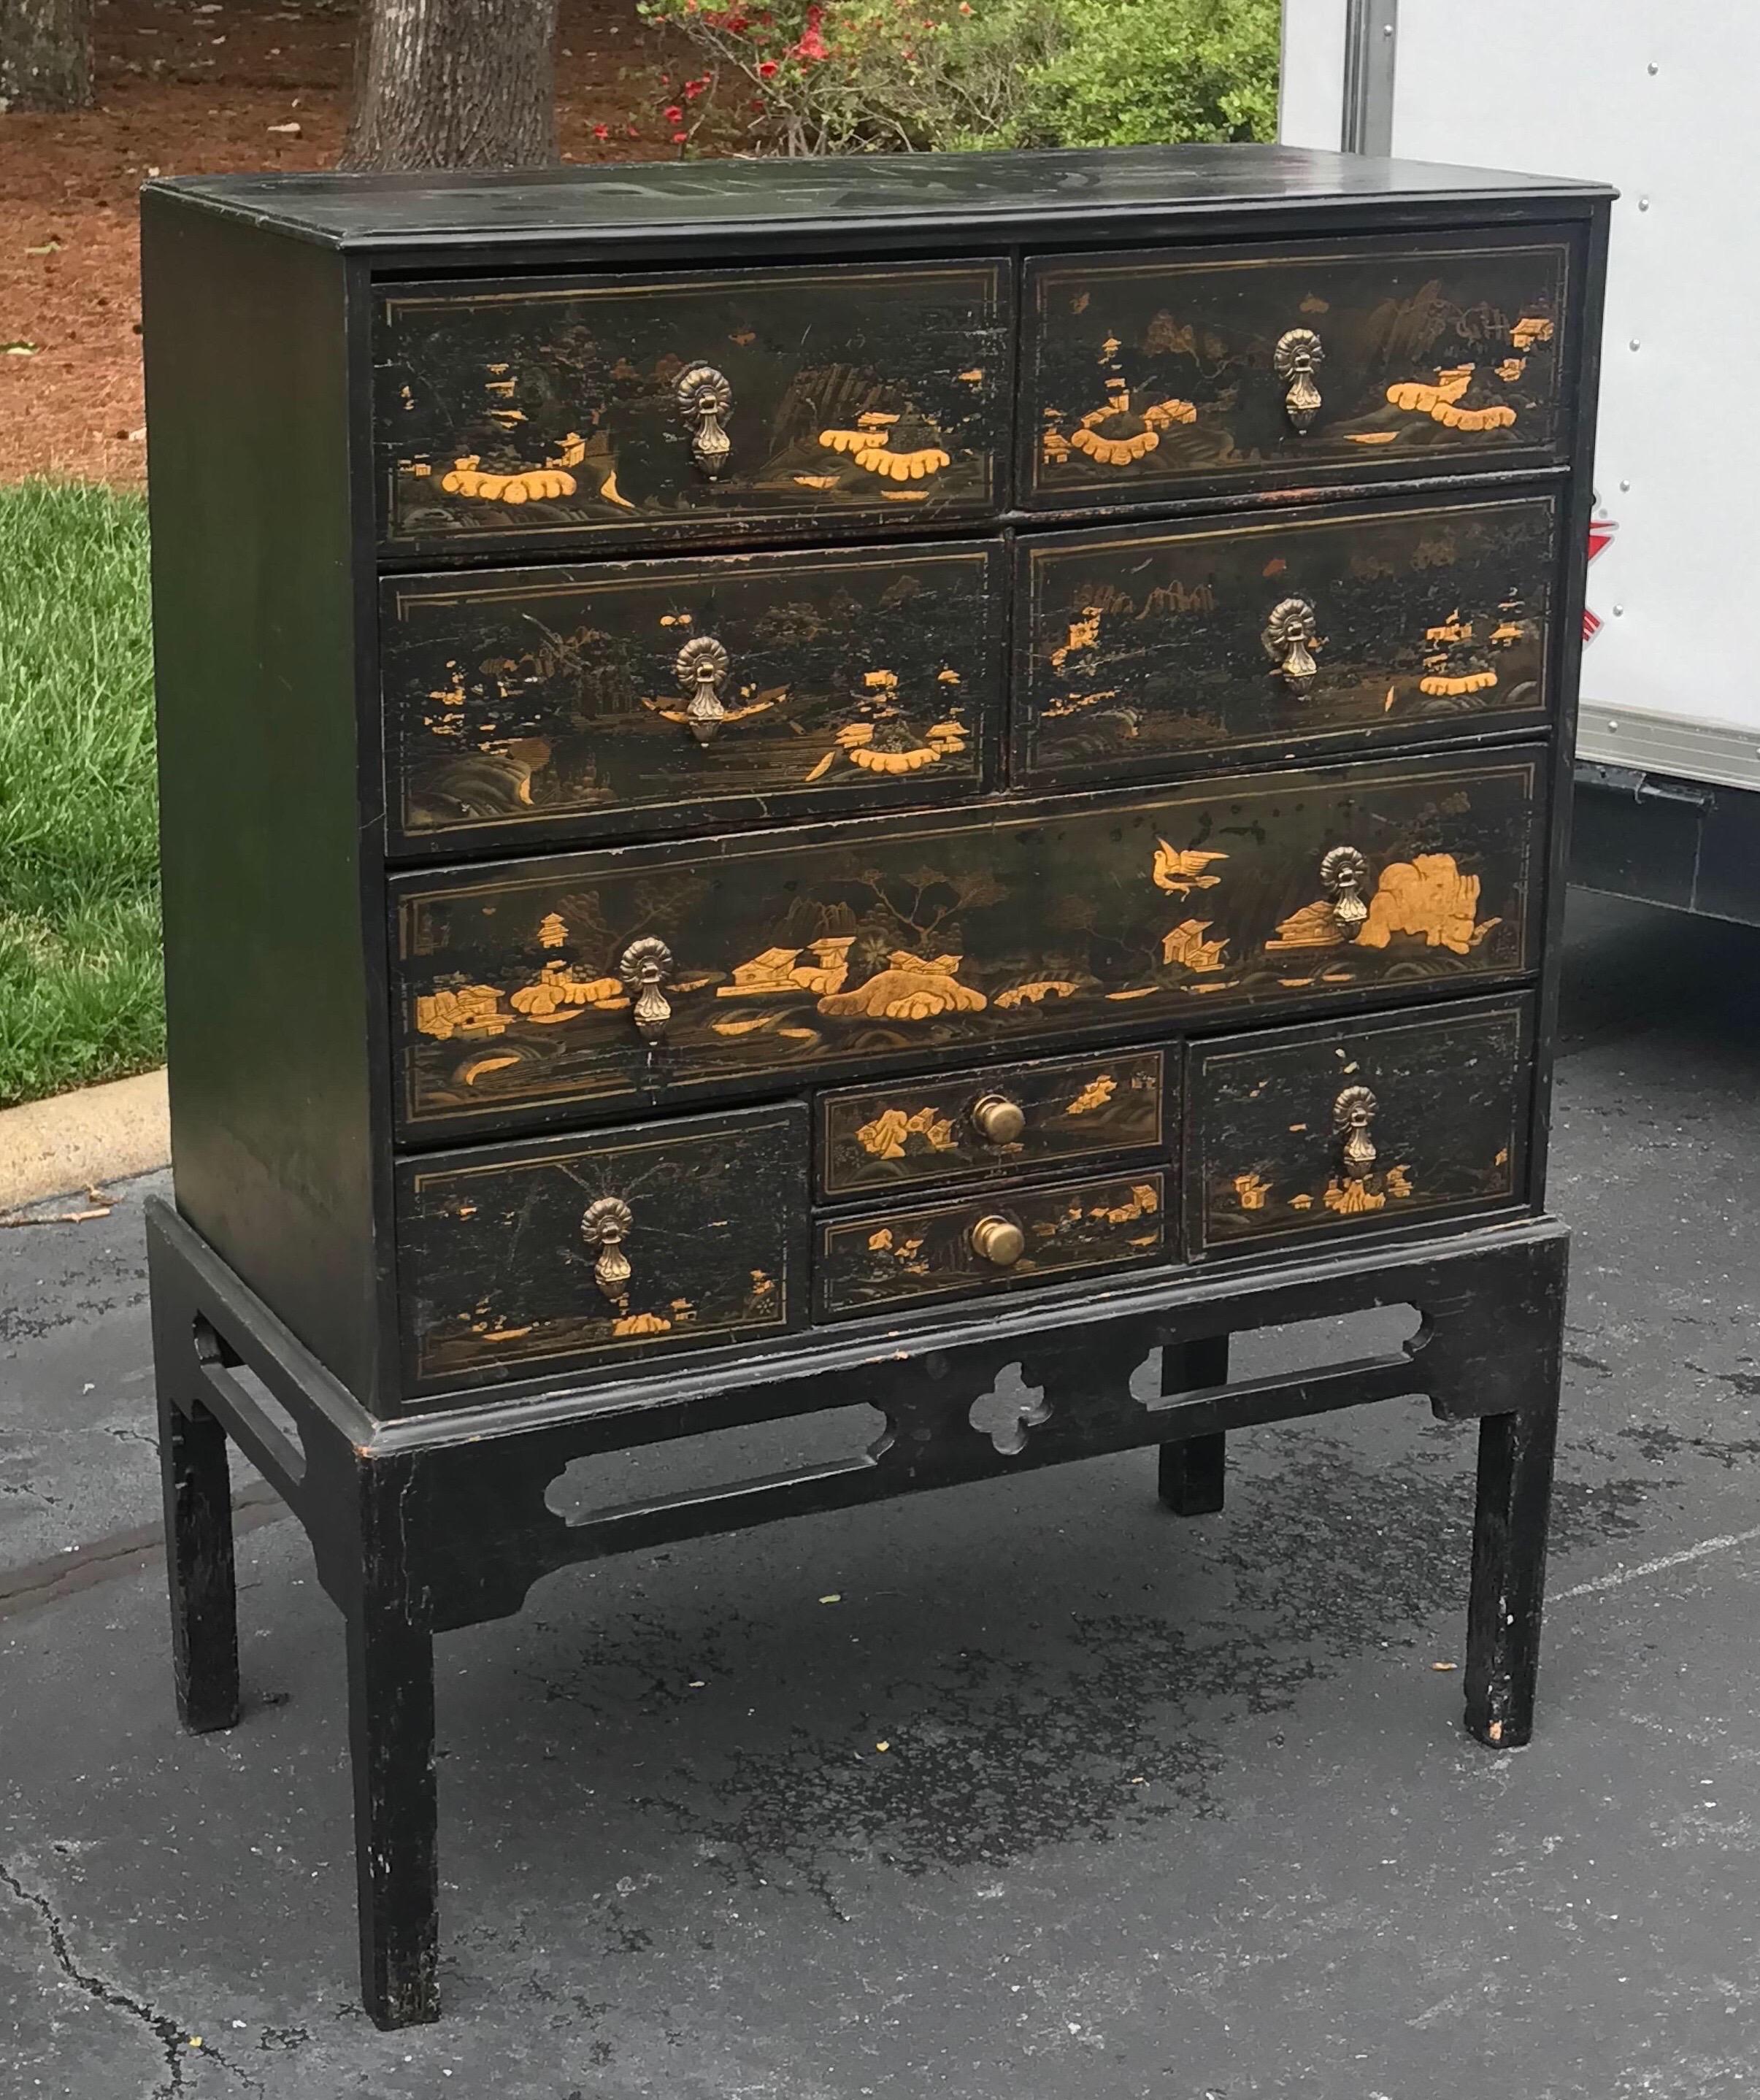 19th century English black lacquered chinoiserie chest on stand. Wonderful japanning throughout the 9 total drawers.